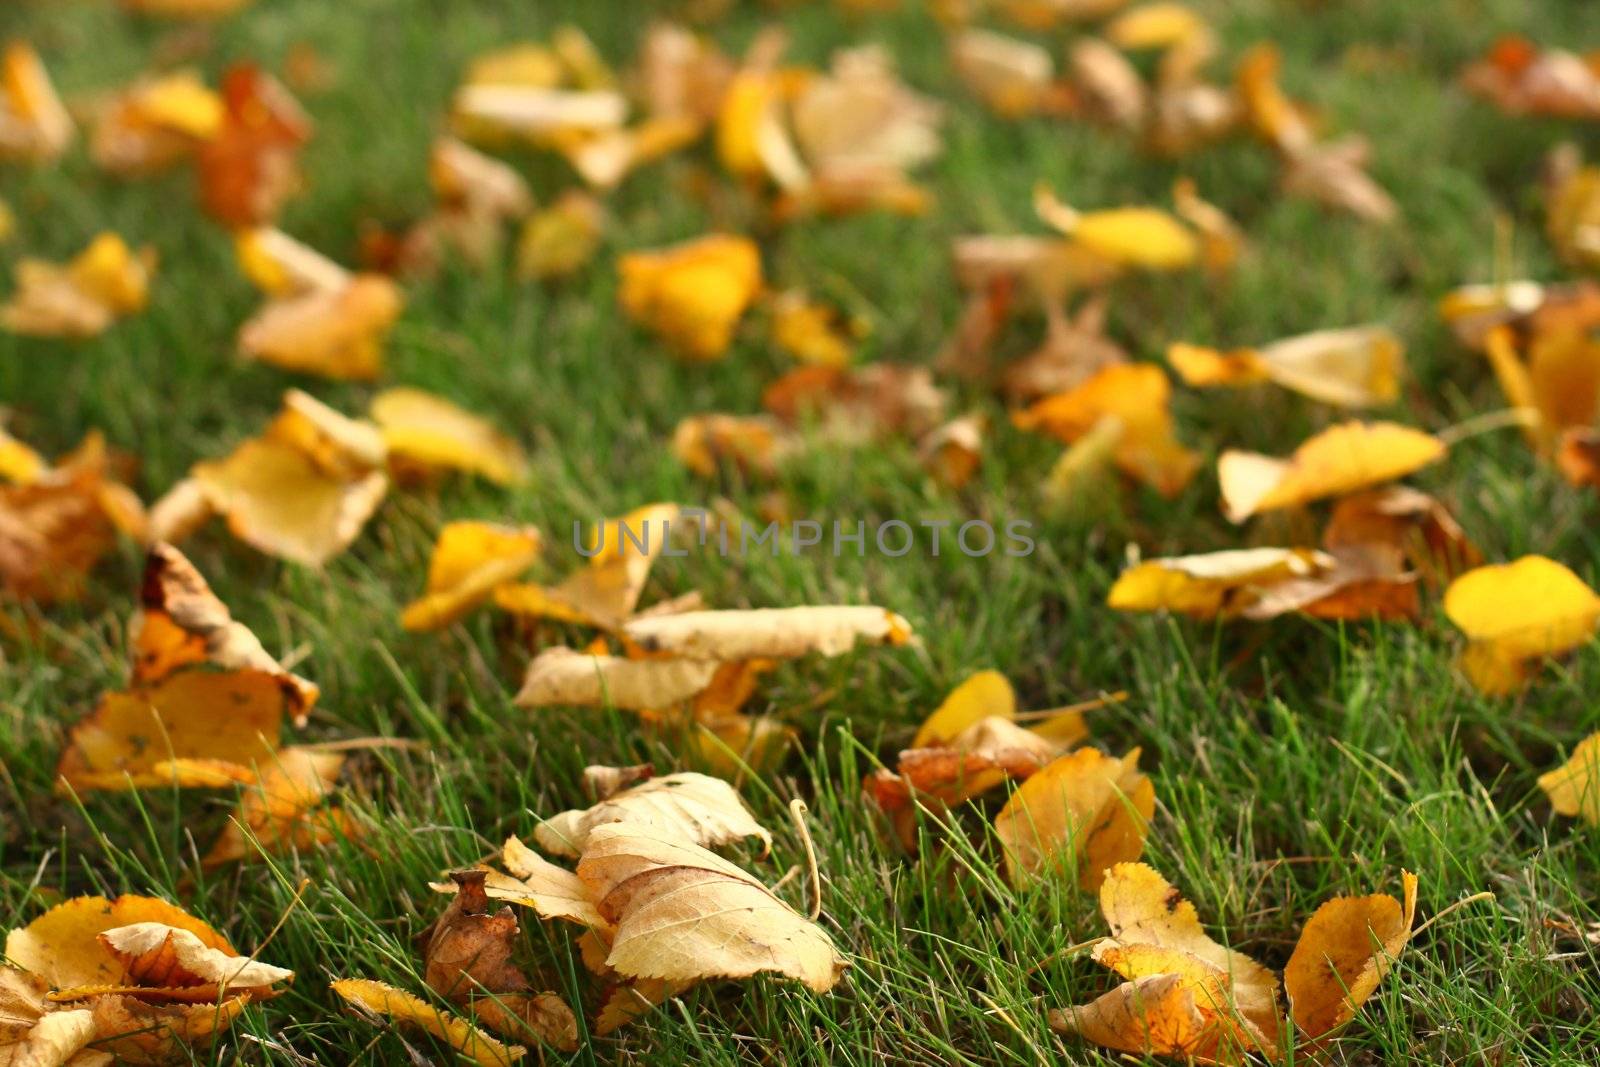 leaves on grass by Yellowj